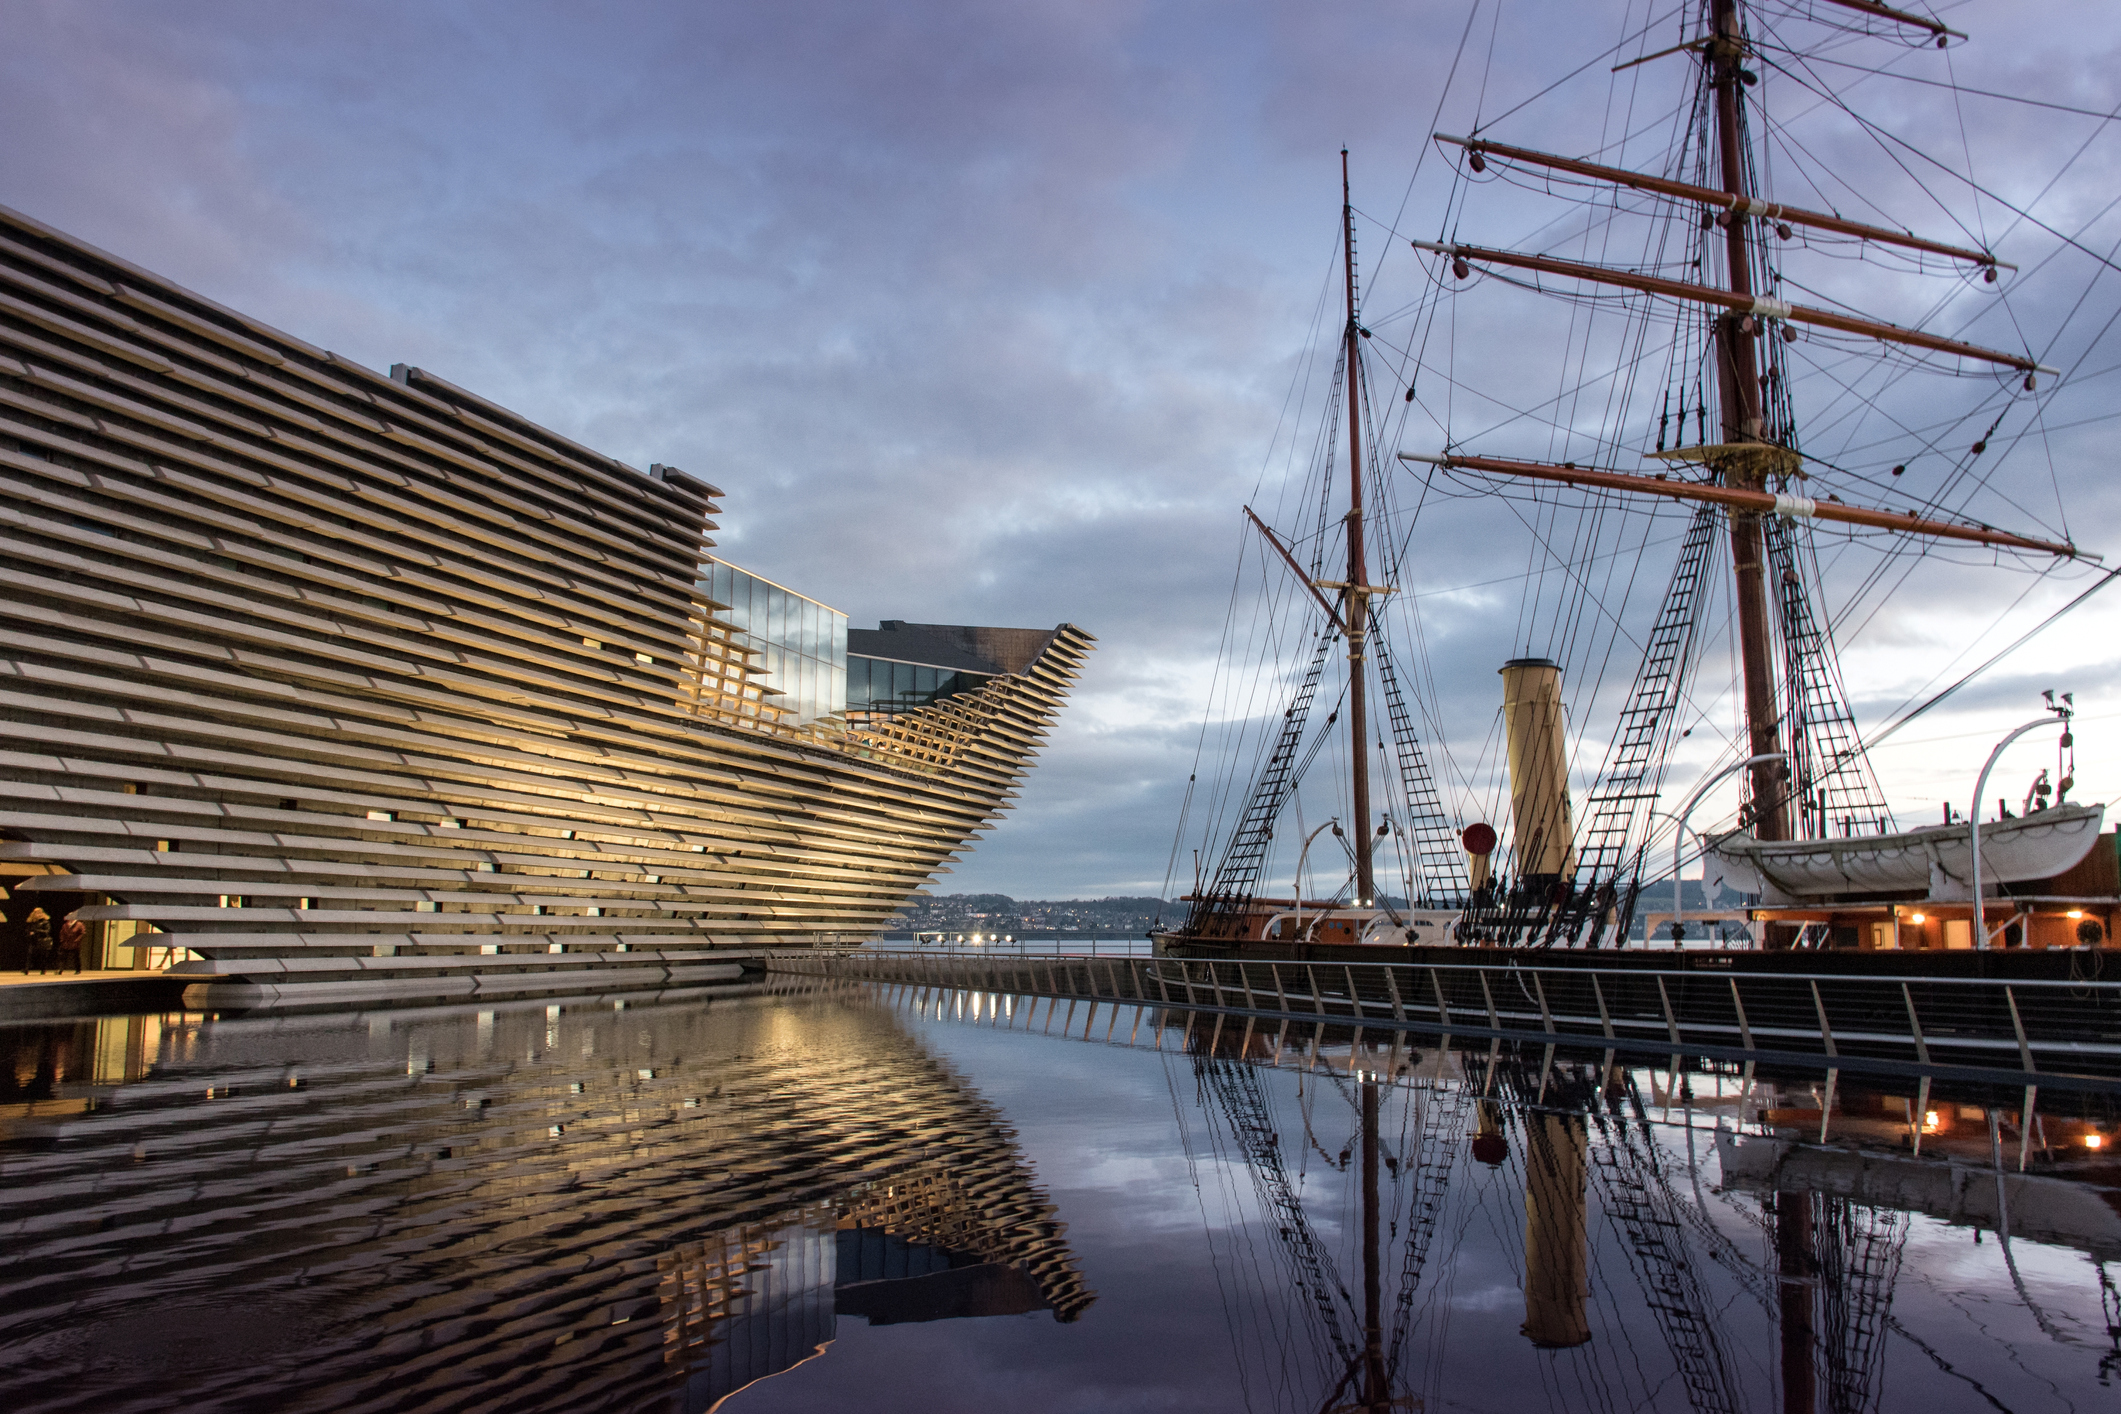 Dundee, Scotland-27 December 2018: Victoria &Albert Museum Dundee exhibition opening Ocean Liners, Scottish Design museum exterior and ship at dusk